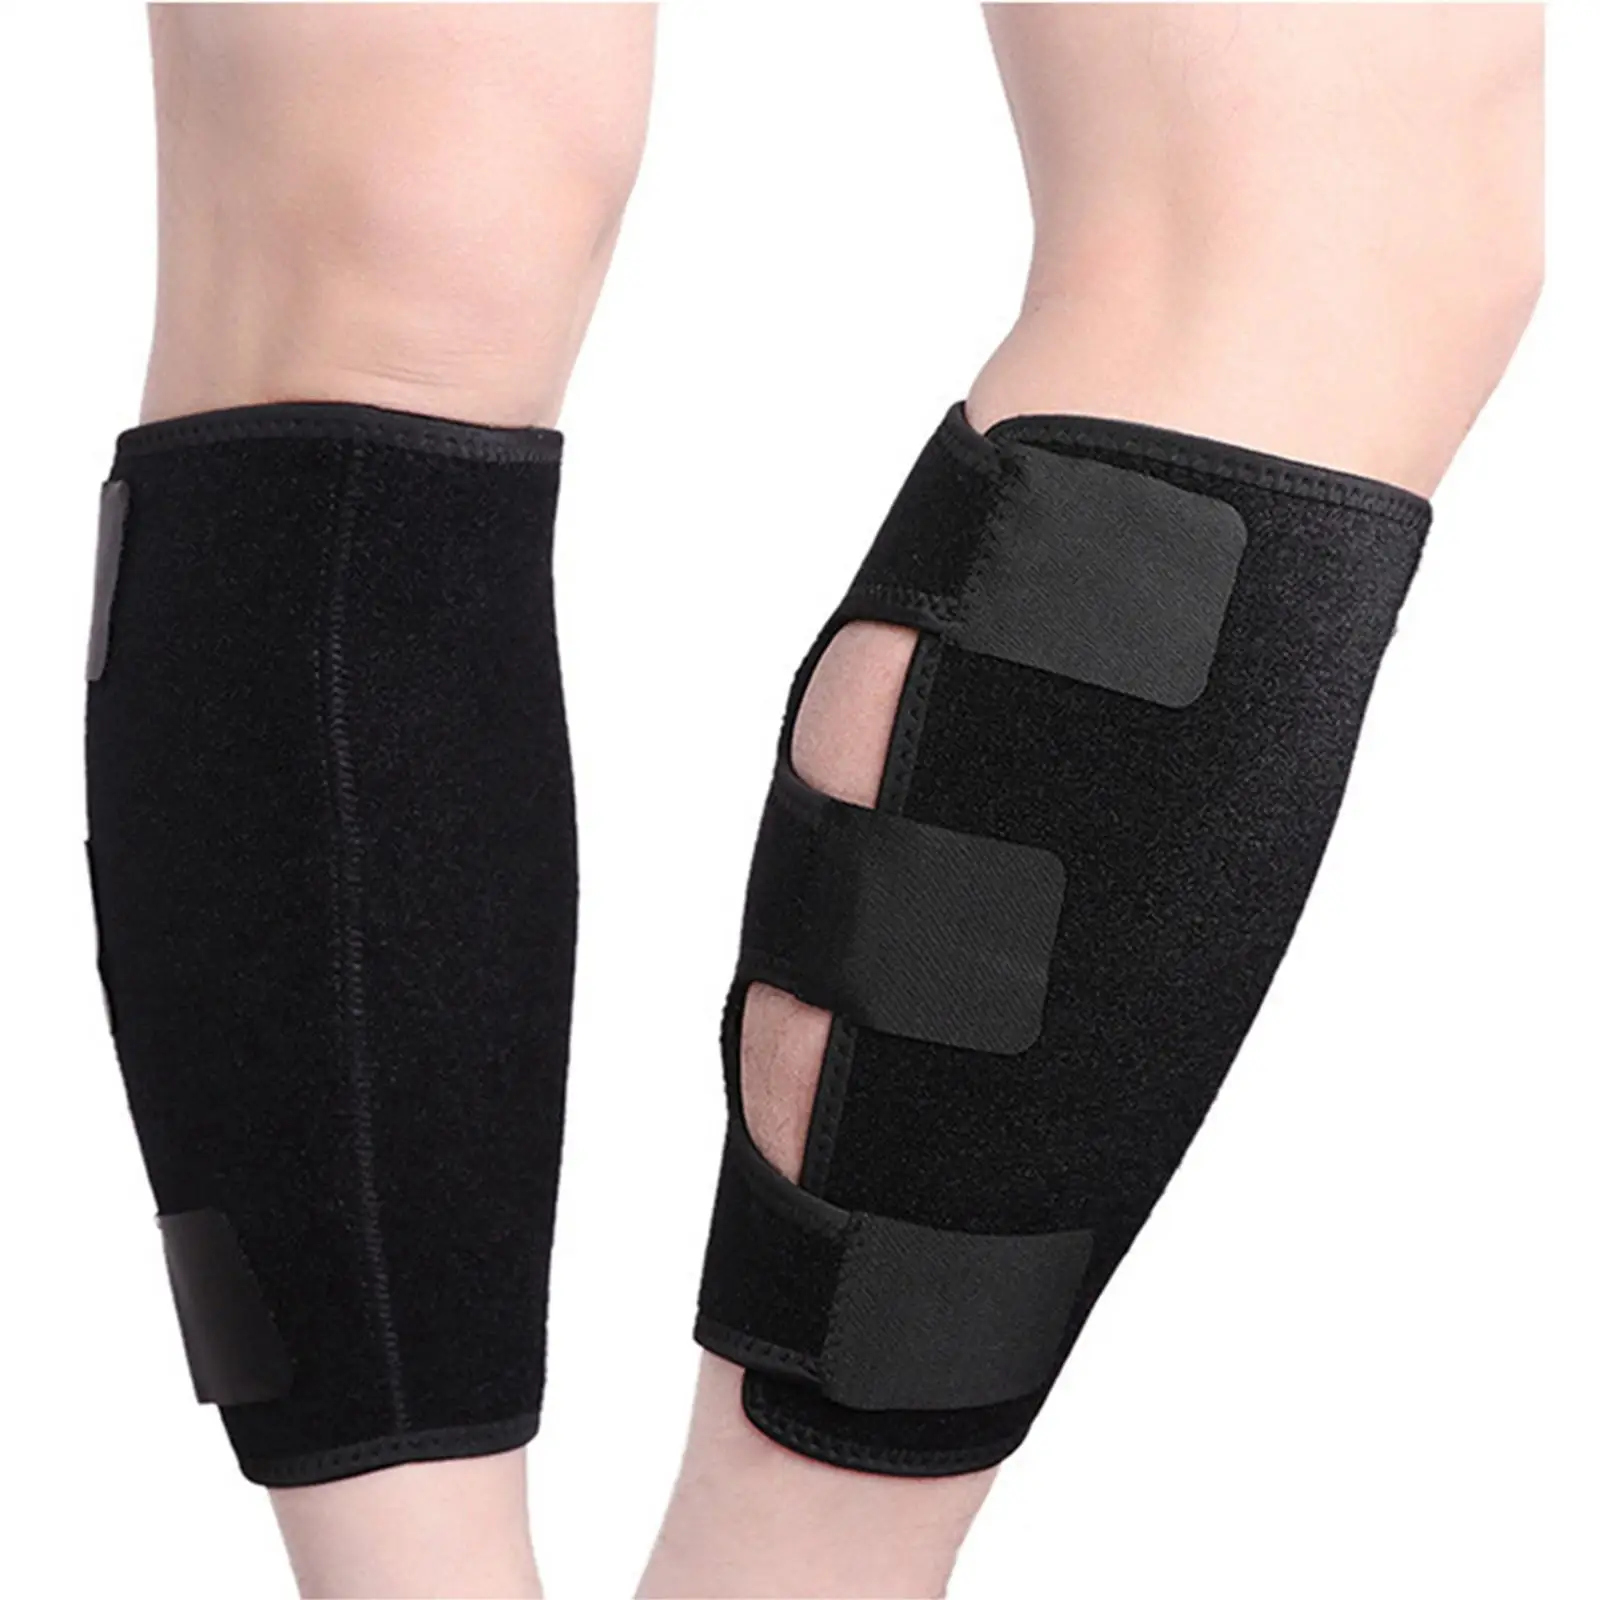 1 Piece Calf Support Brace Accessories Elastic Adjustable Durable Leg Sleeves for Men and Women Gym Outdoor Running Hiking